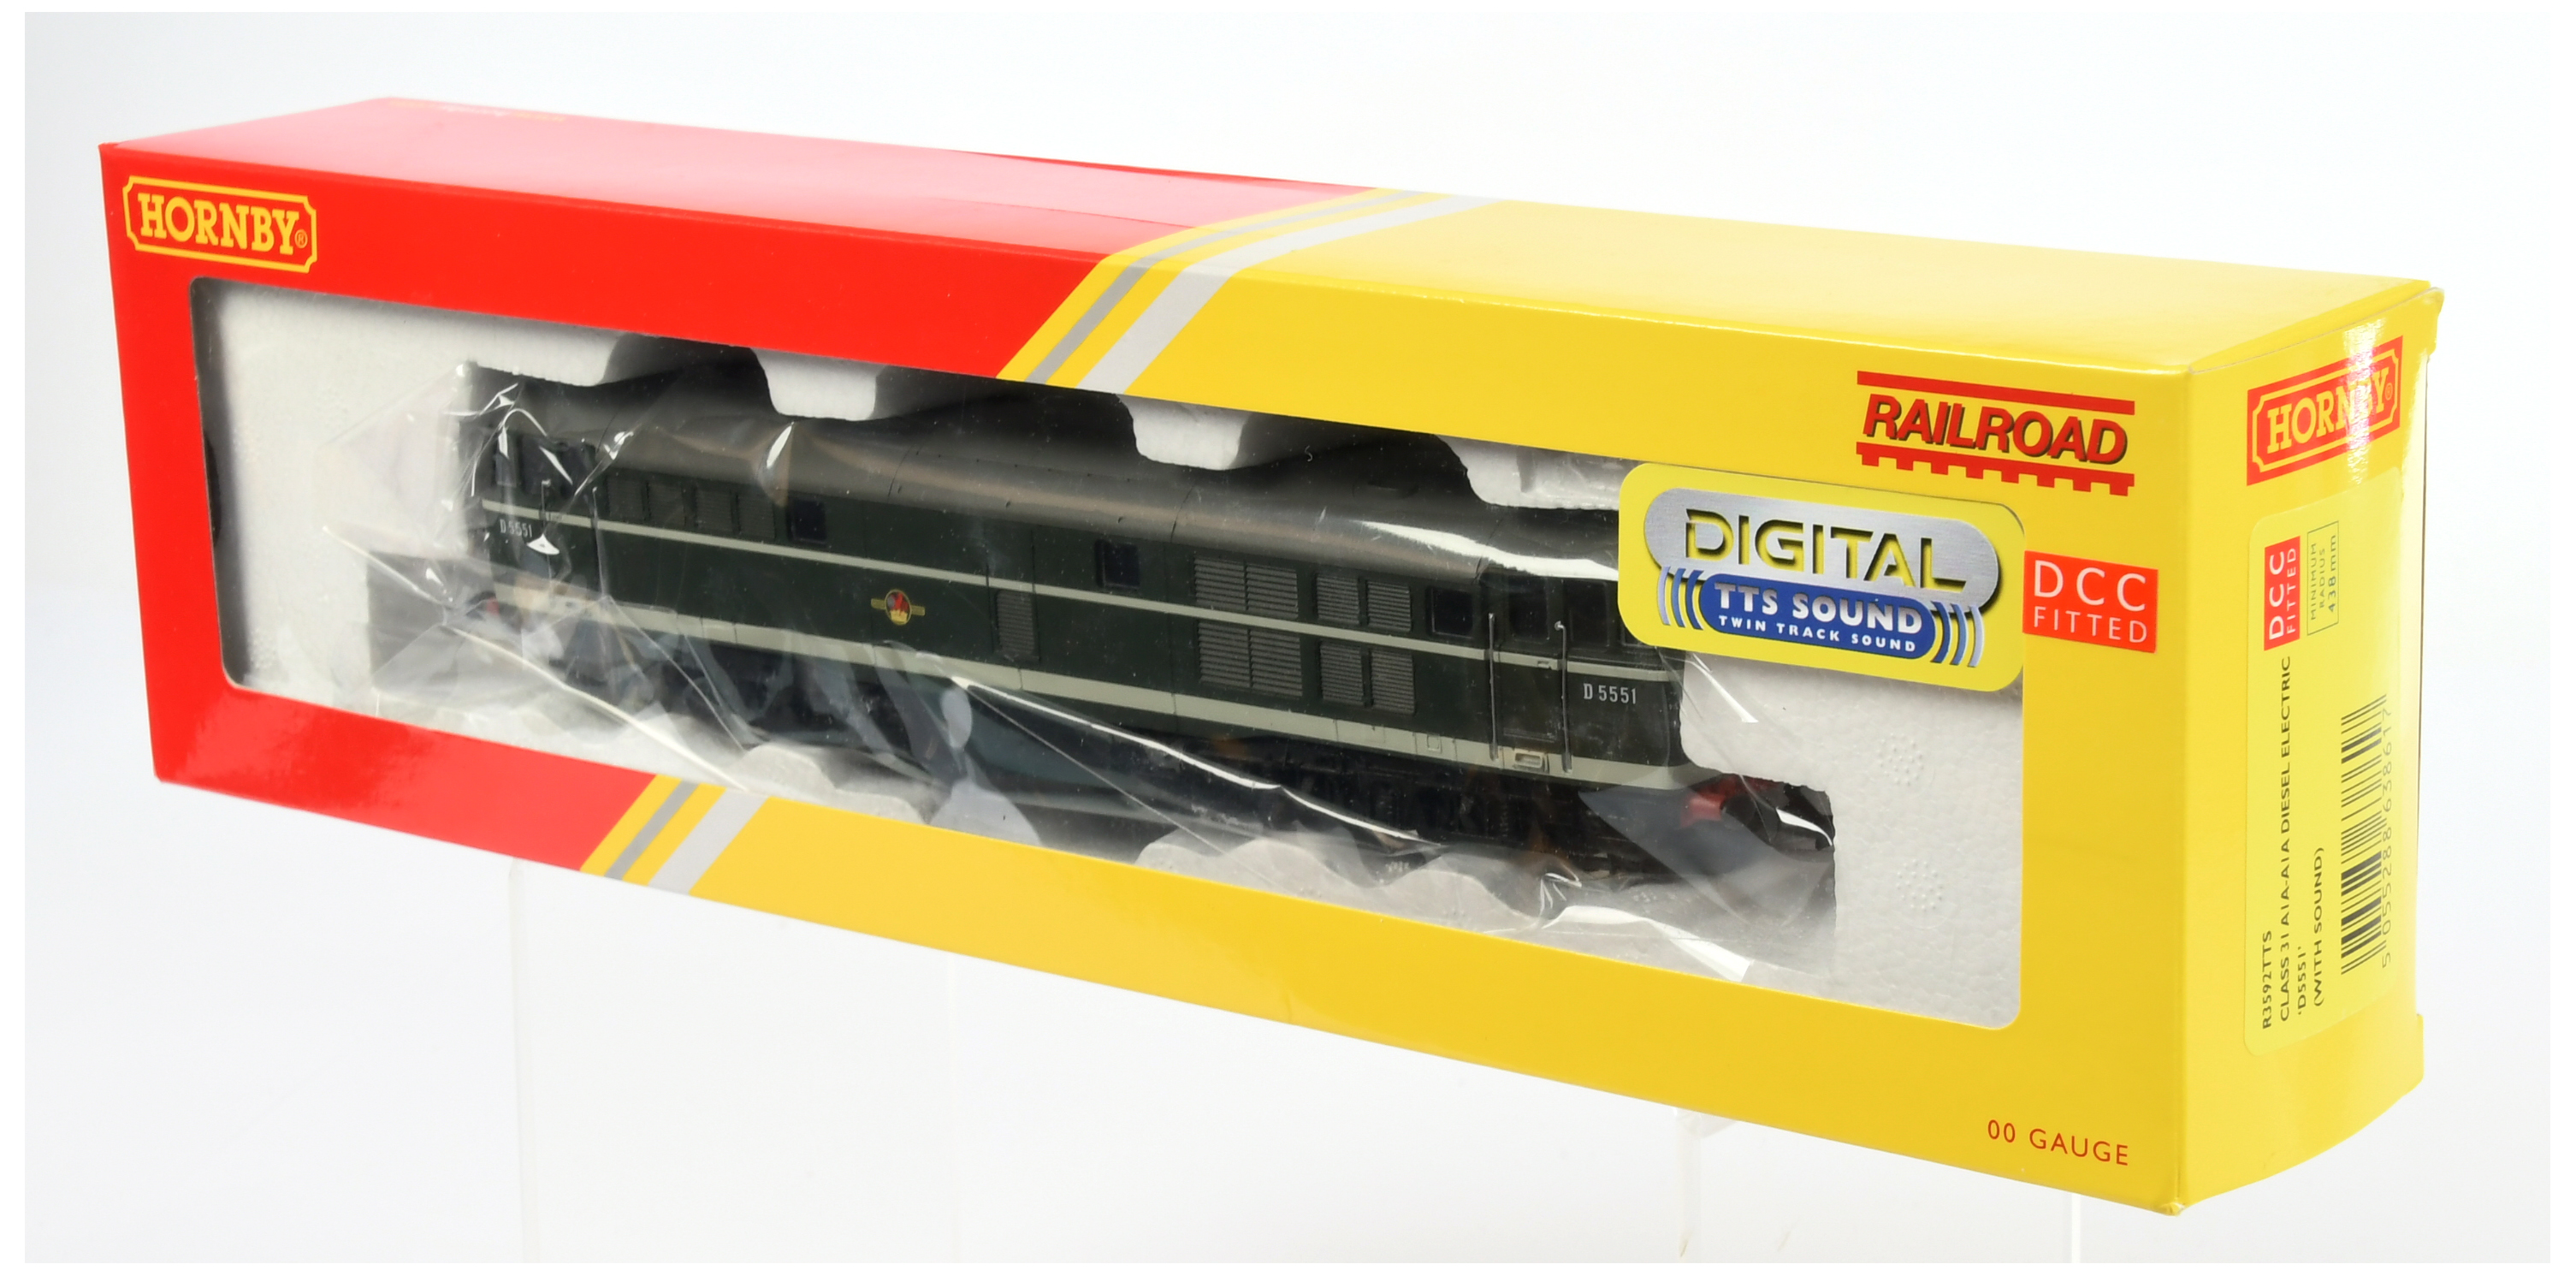 Hornby (China) Railroad R3592TTS BR Class 31 AIA-AIA Diesel Locomotive "D5551" with sound on board